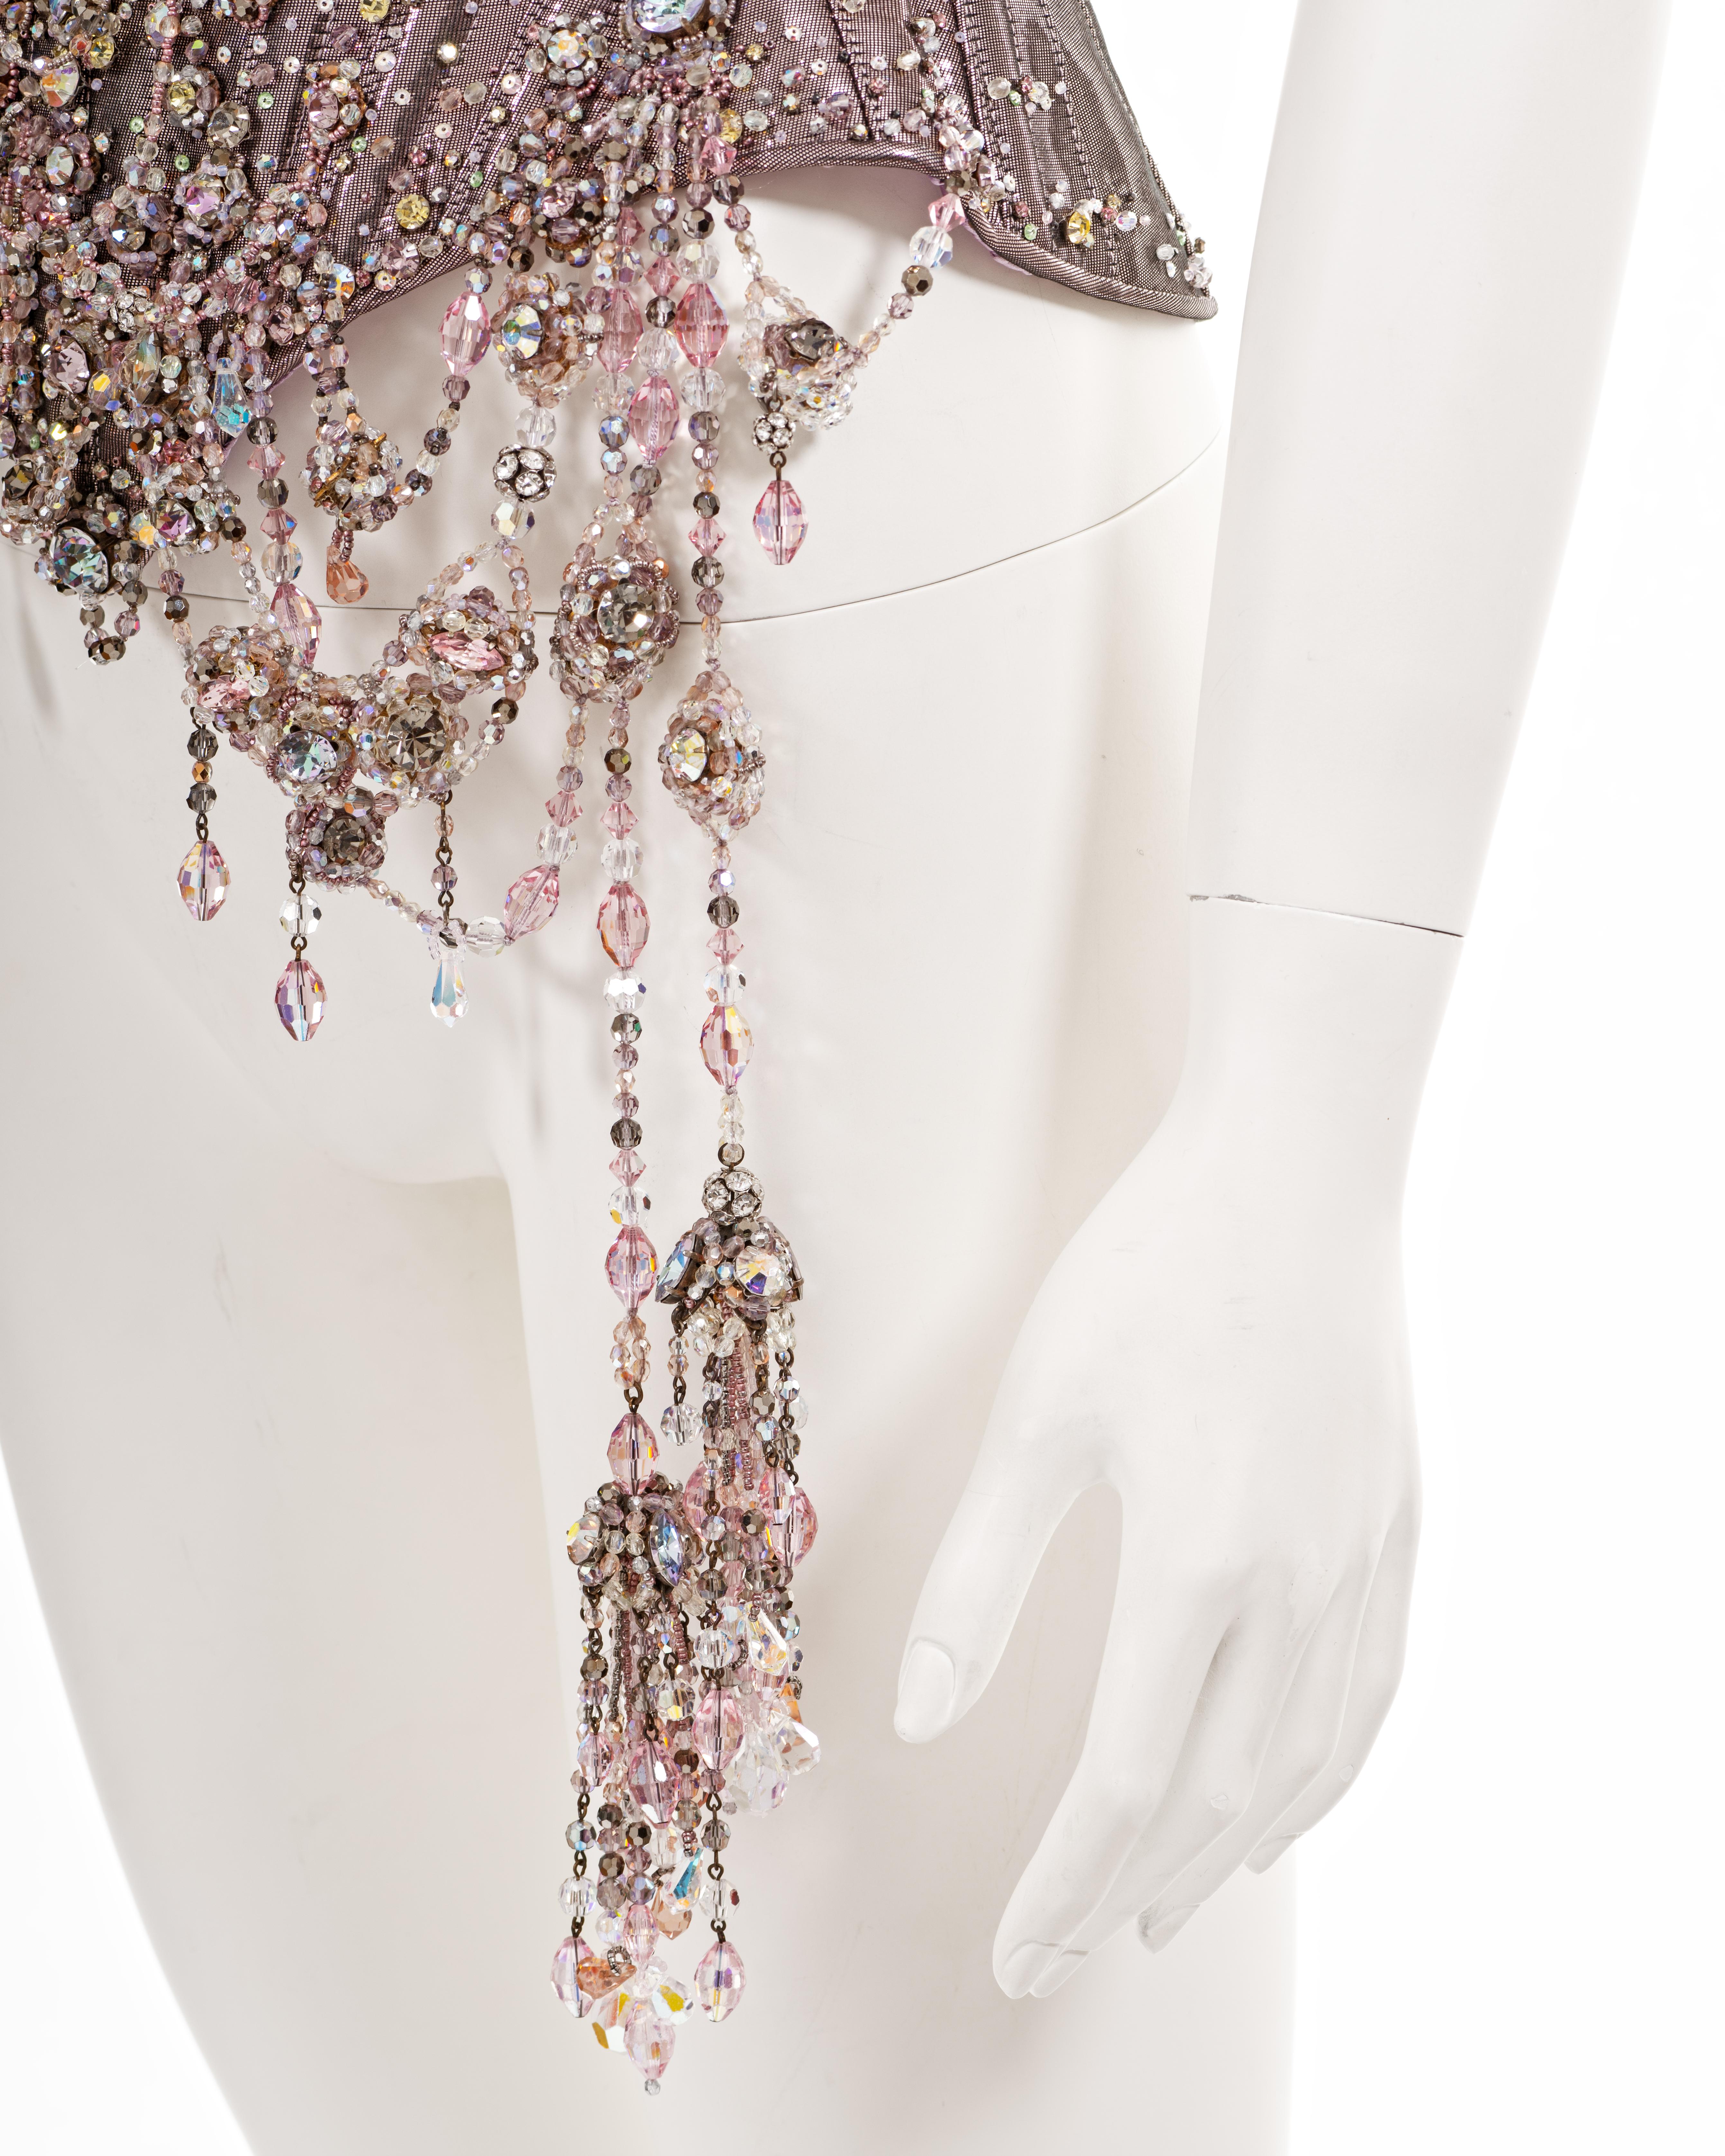 Christian Lacroix Haute Couture Crystal Adorned Mr. Pearl Corset, ss 1996 11